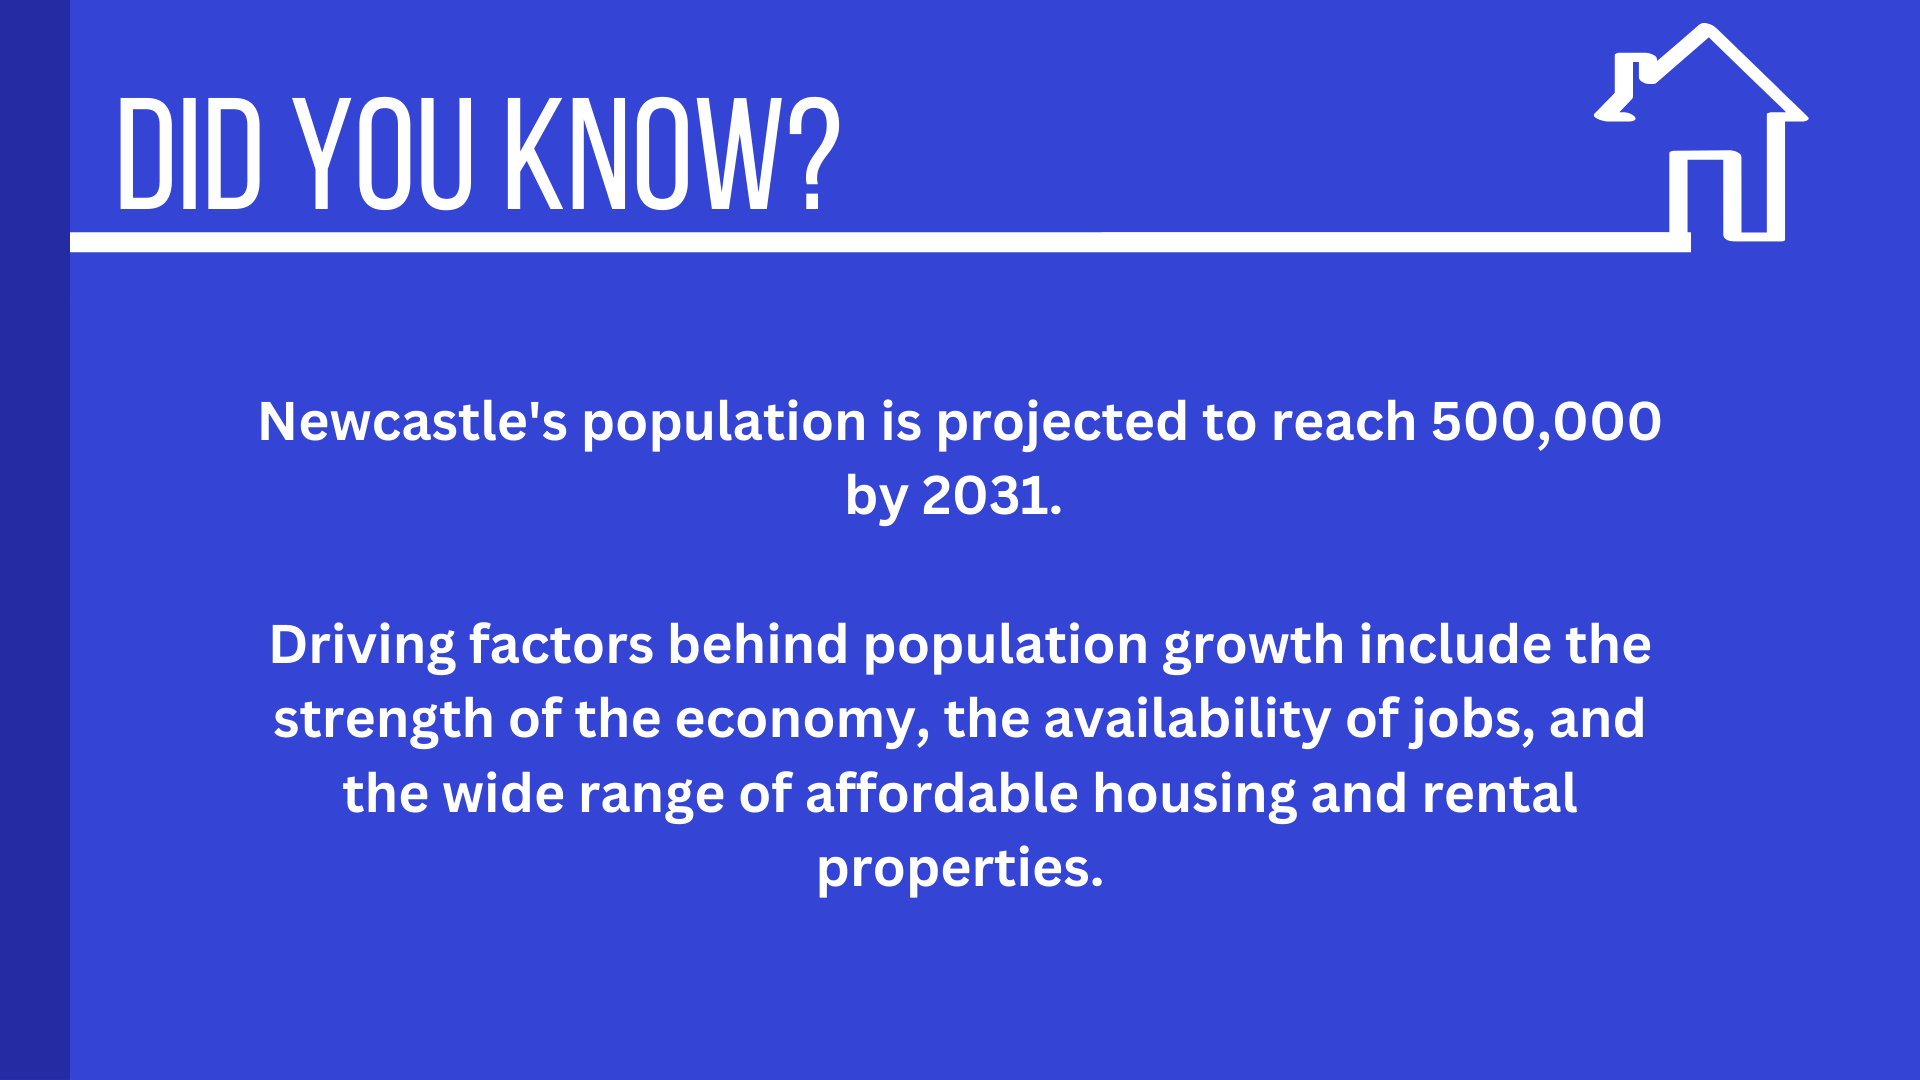 fact about newcastle population growth